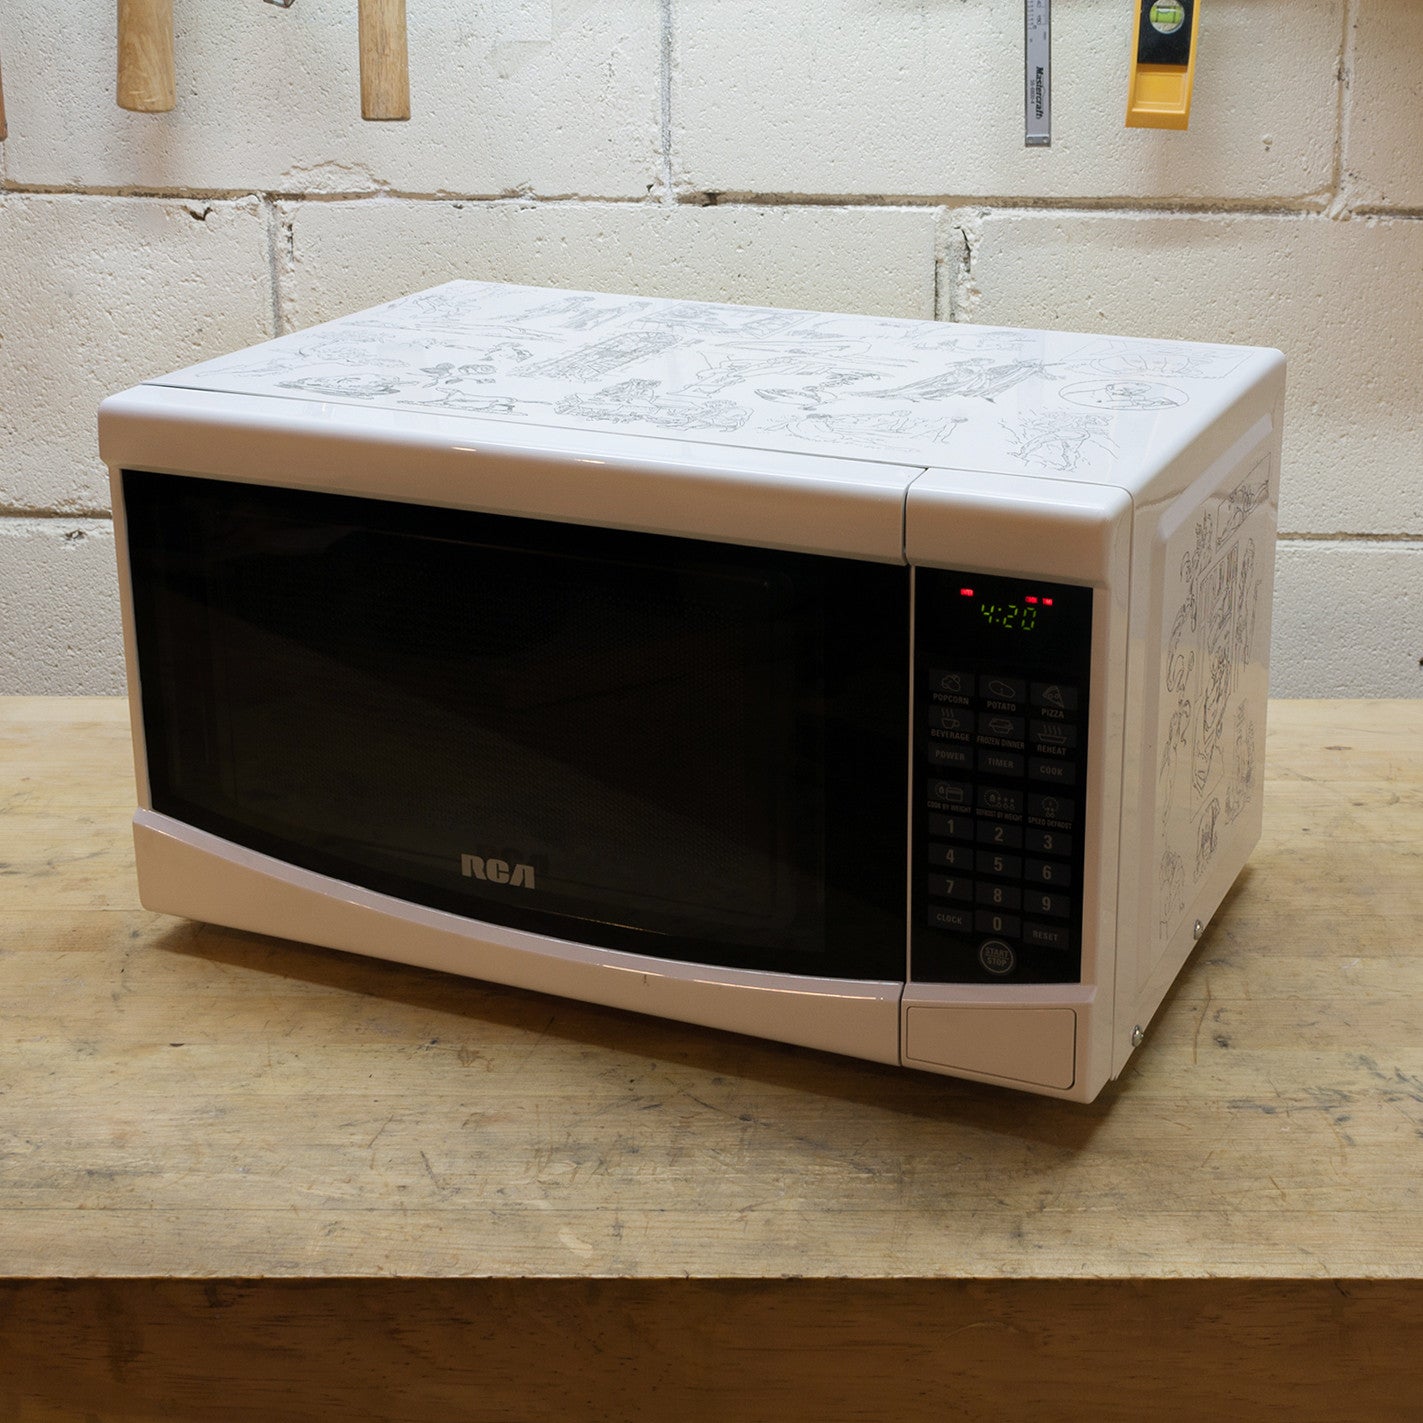 Brad Tinmouth, "Etched Microwave"